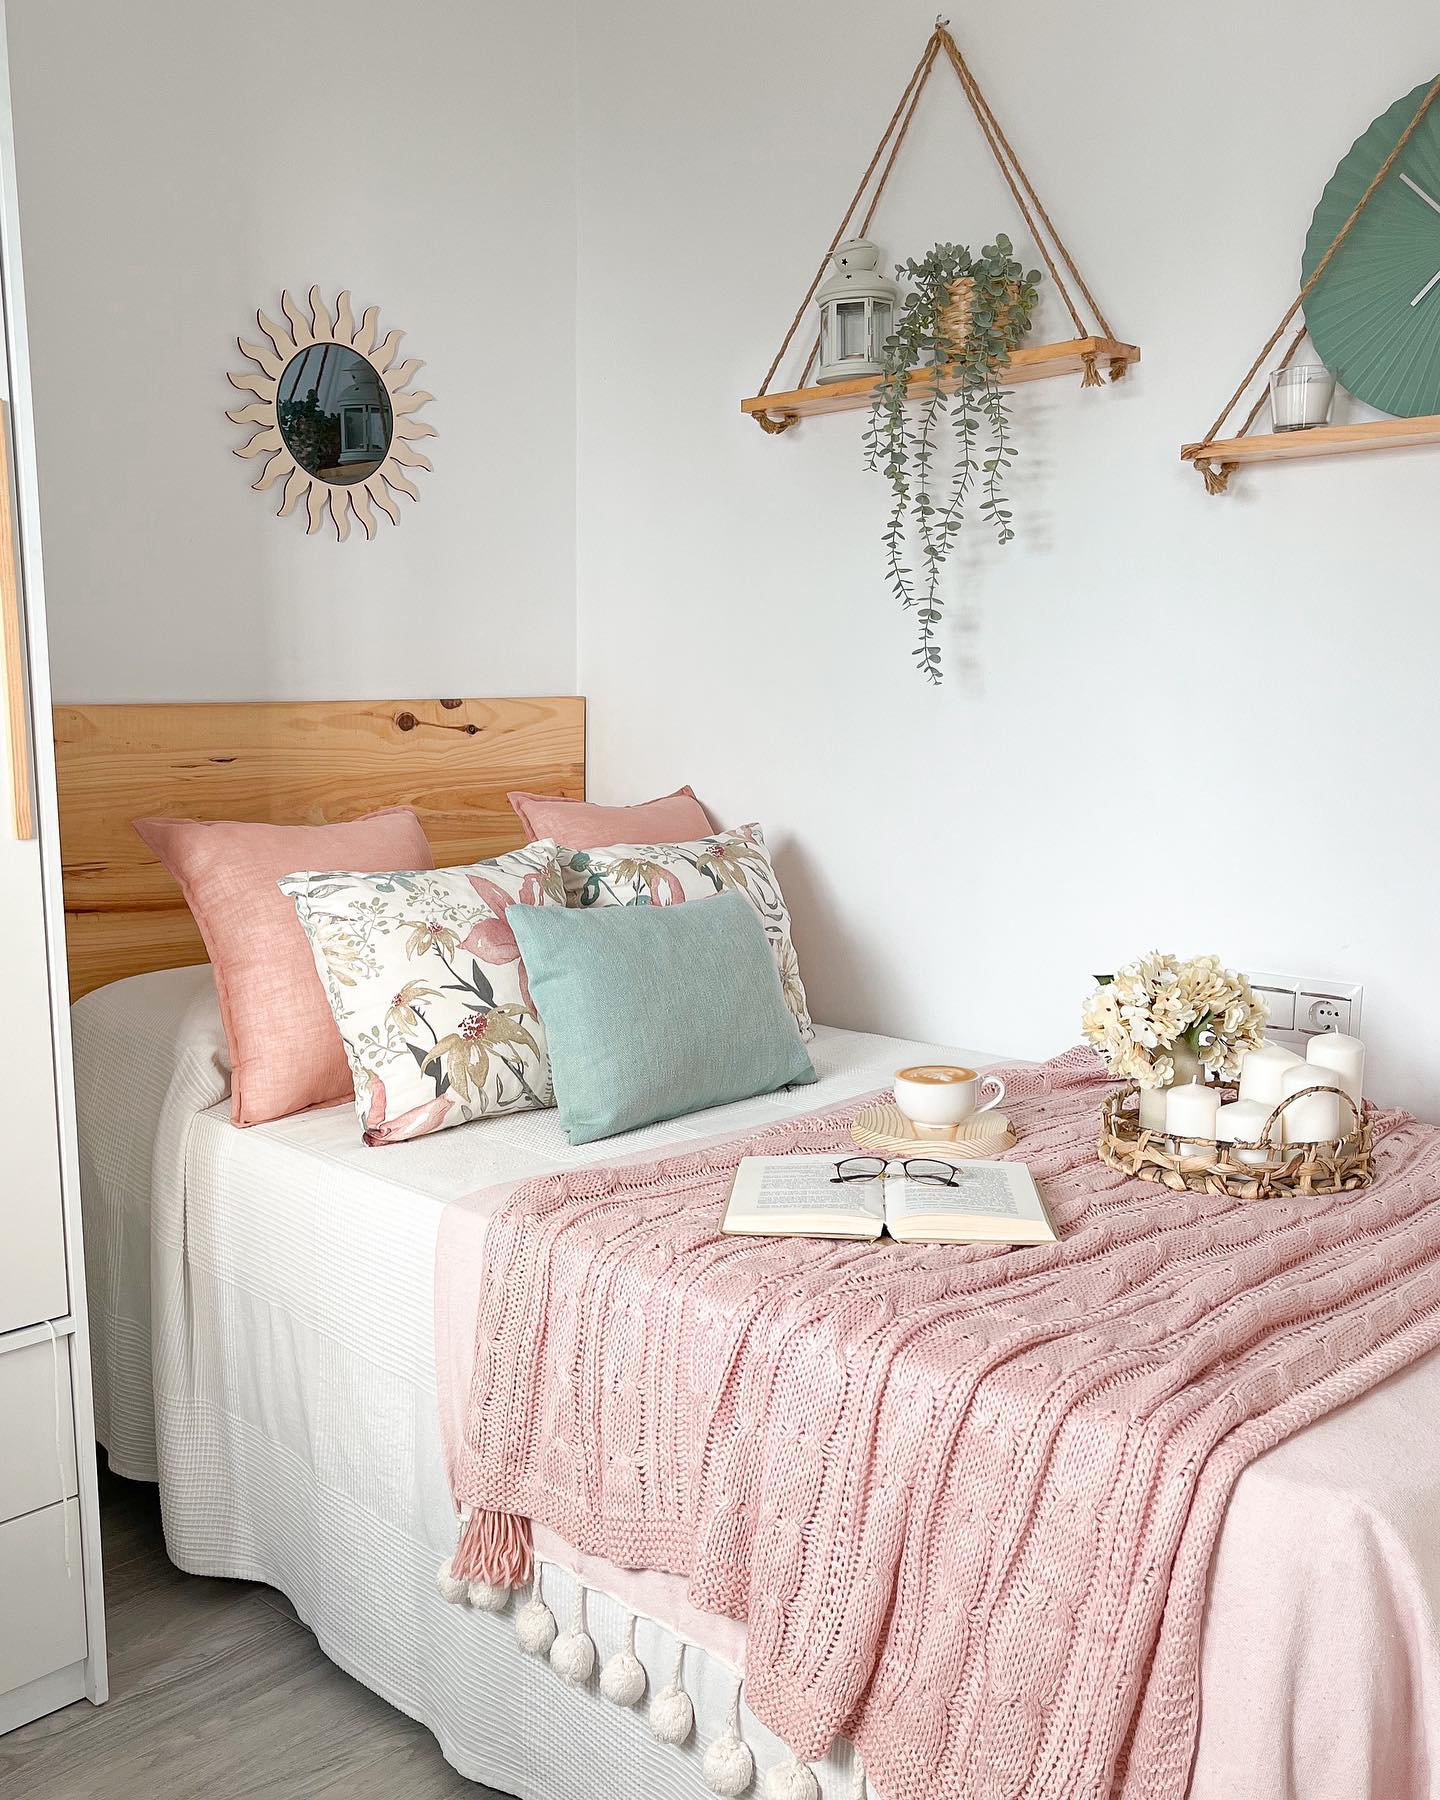 Baddie Bedroom Decor For Small Space